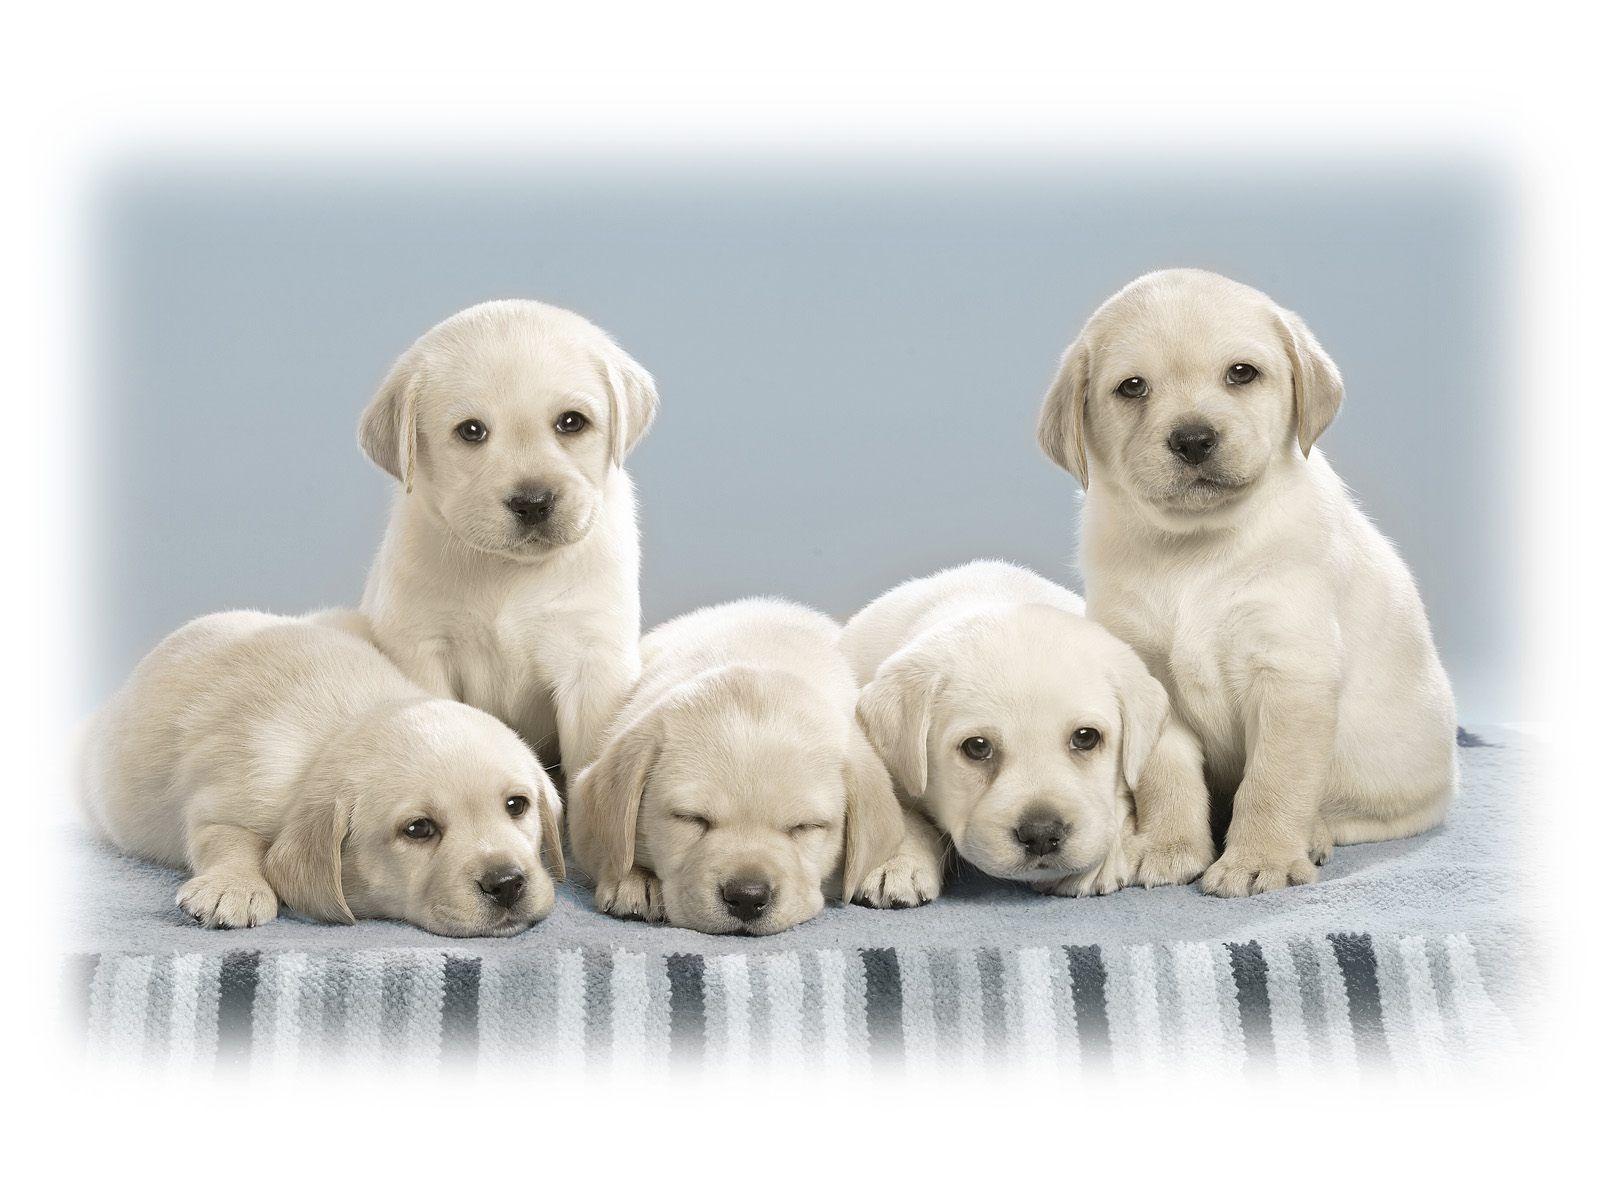 Puppy Background For Computer 135959 High Definition Wallpaper